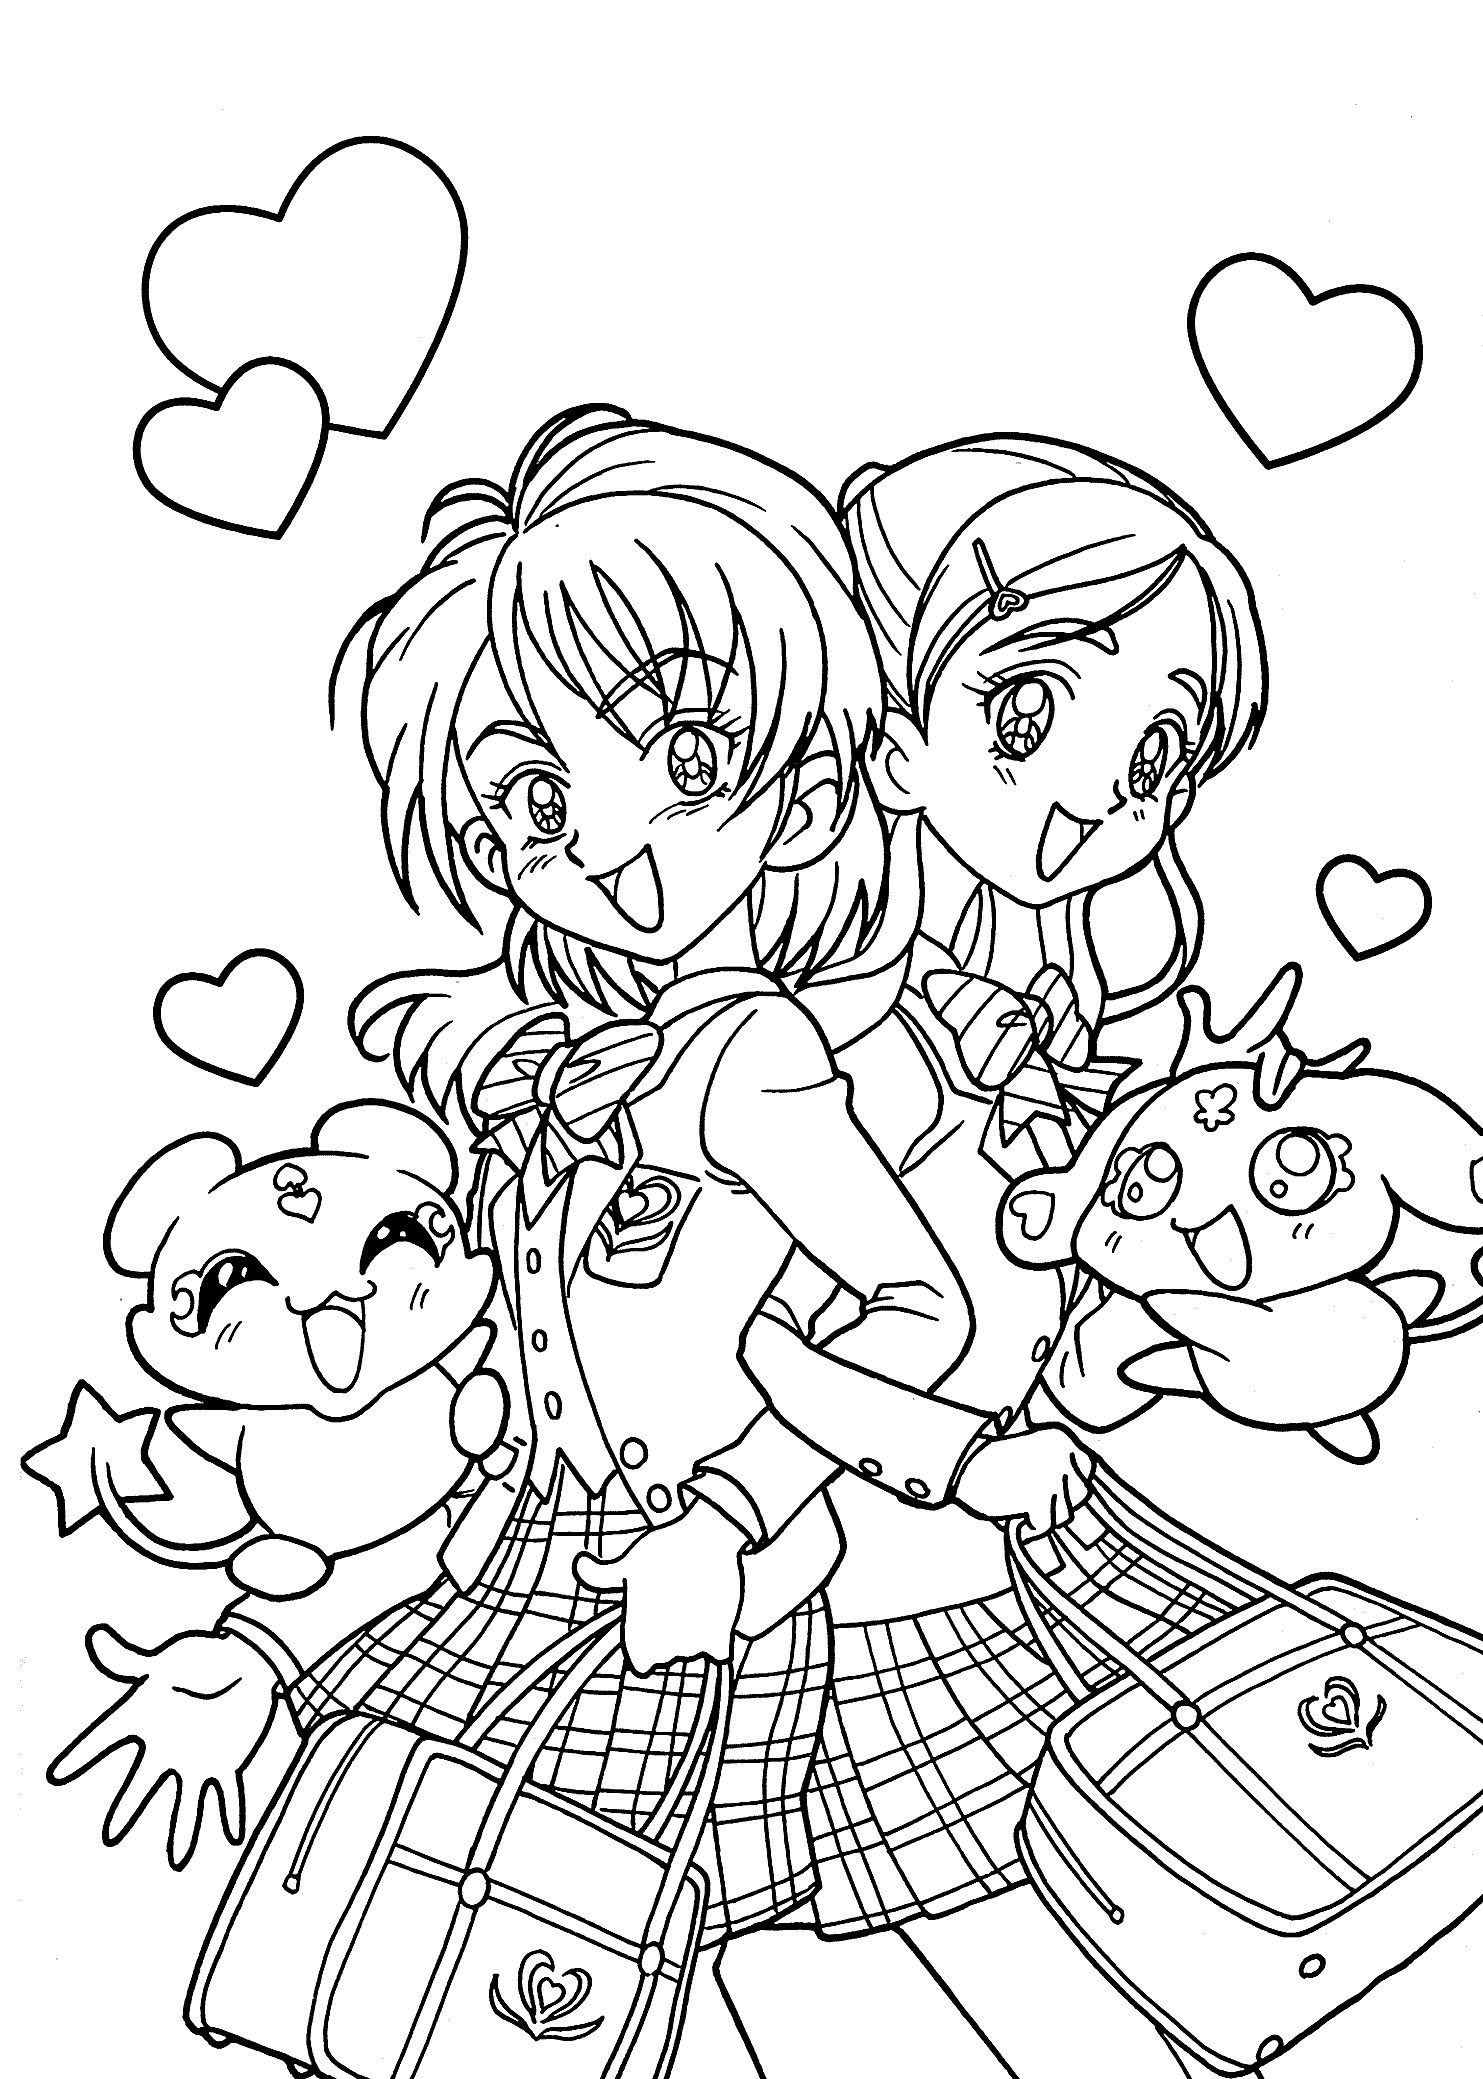 Anime Coloring Pages For Teens
 Manga Coloring Pages Bestofcoloring